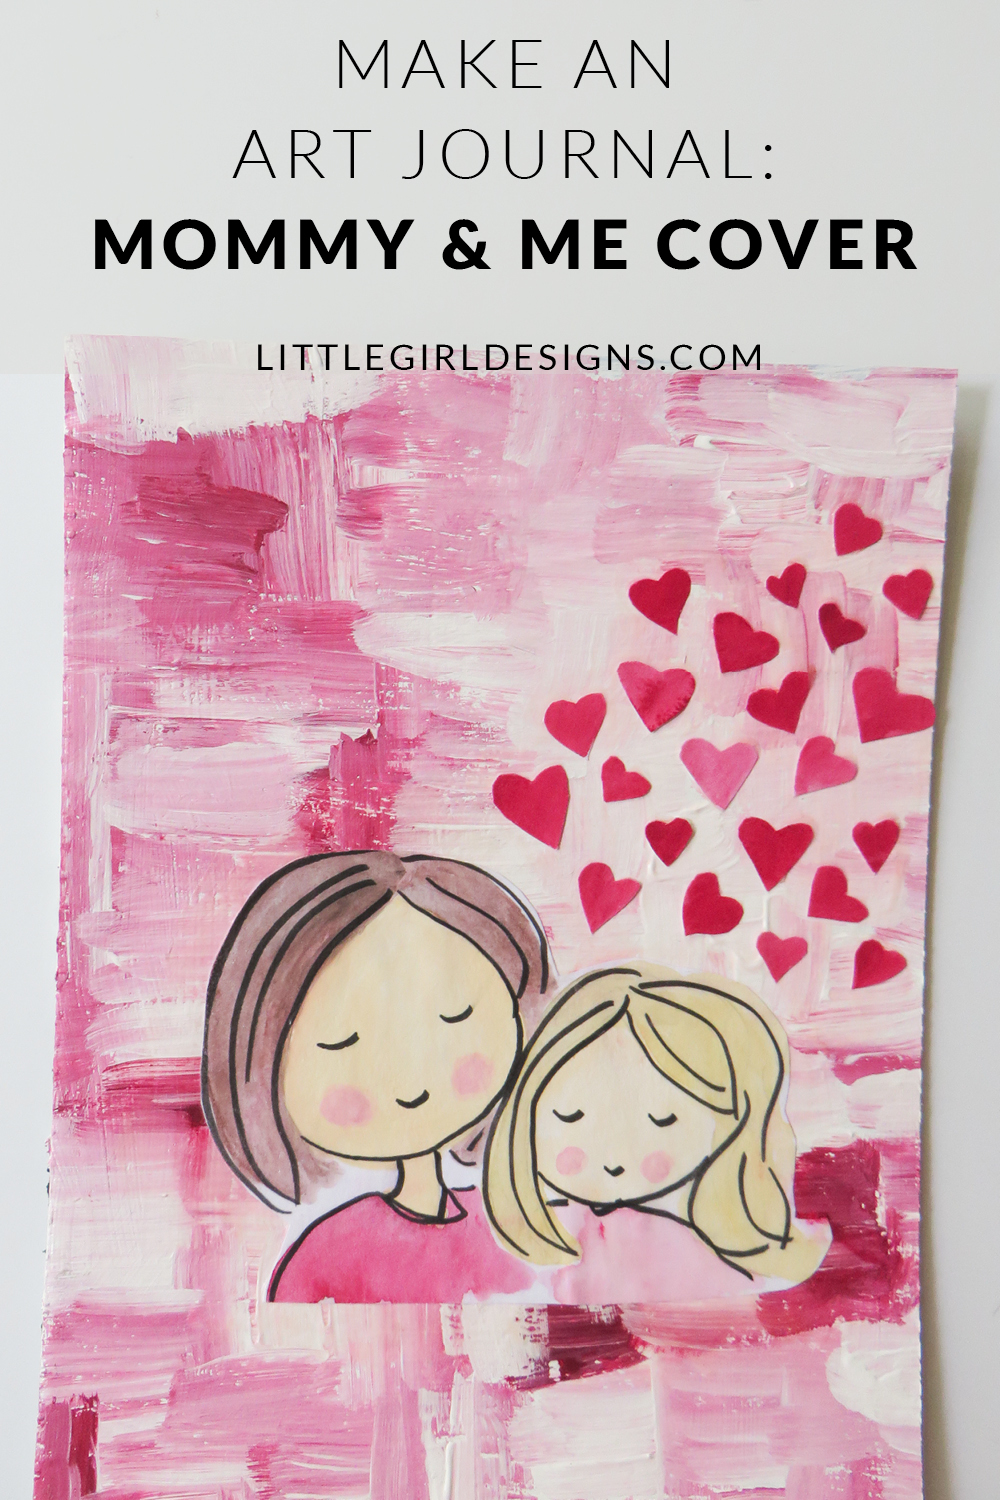 Make An Art Journal: Mommy & Me Collage Cover - How to make an art journal cover using chip board, paint, and collage. This is the third post in a series on how to make your own journal. You could also use this technique to make a mommy and me collage for your home. Makes a great gift for Mother's Day and birthdays! @ littlegirldesigns.com